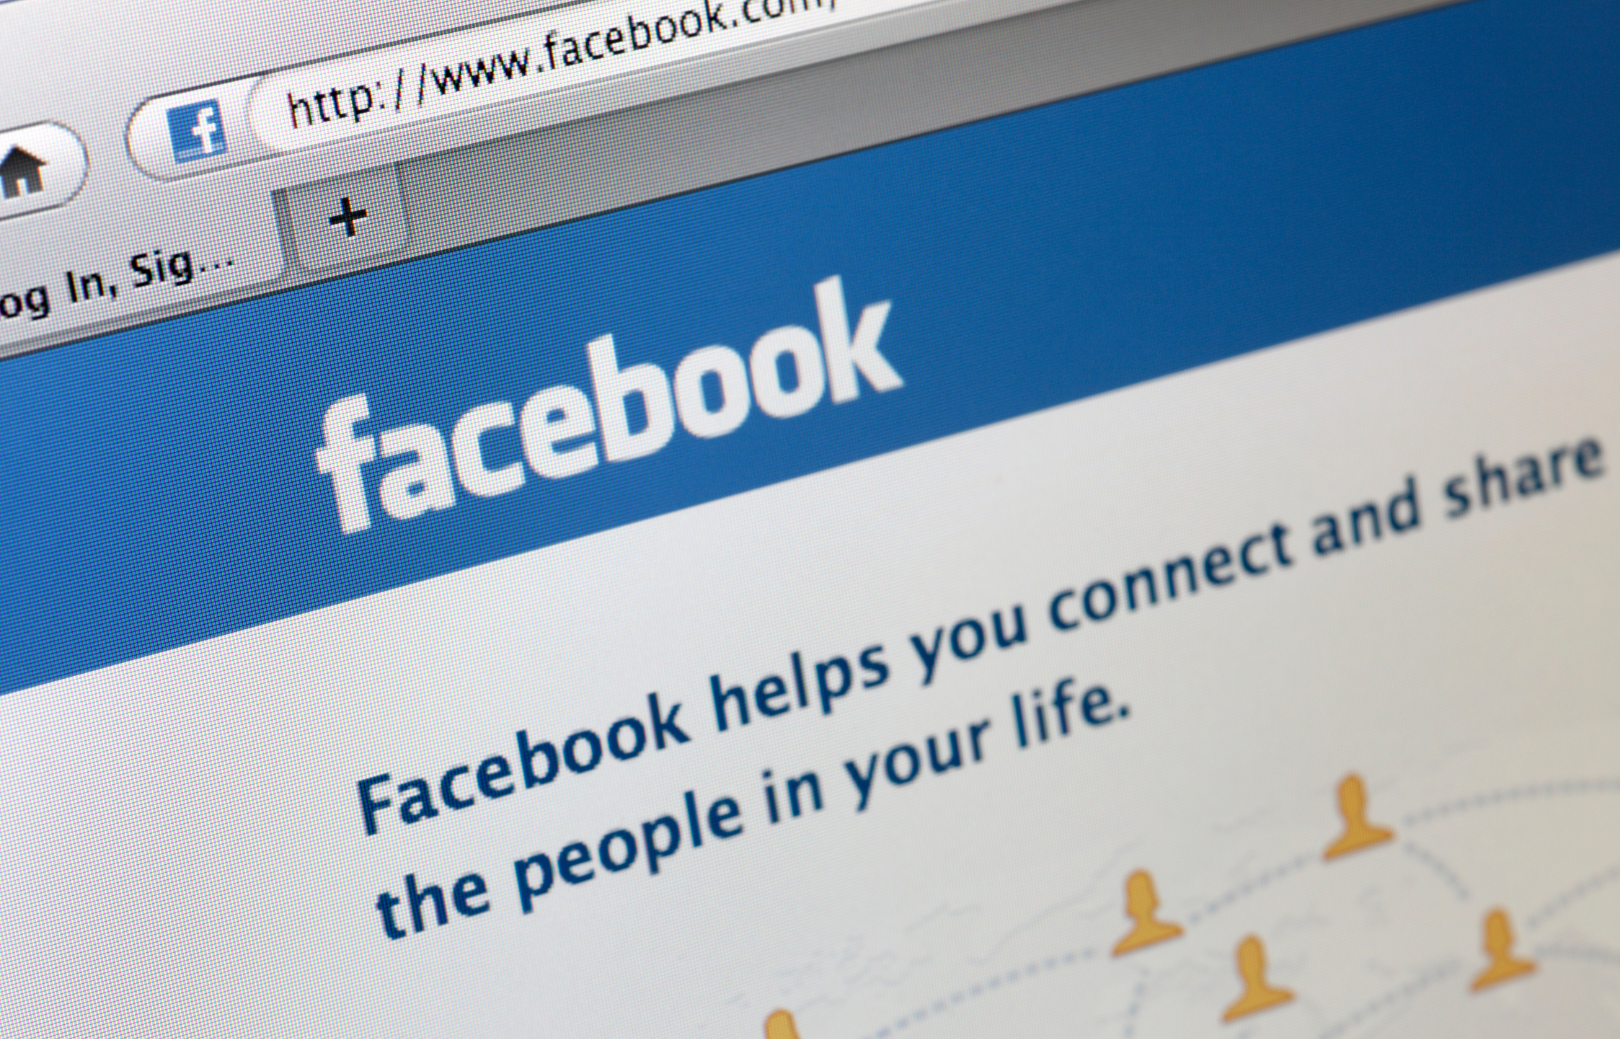 The 5 Things Your Facebook Page Needs to Look Professional